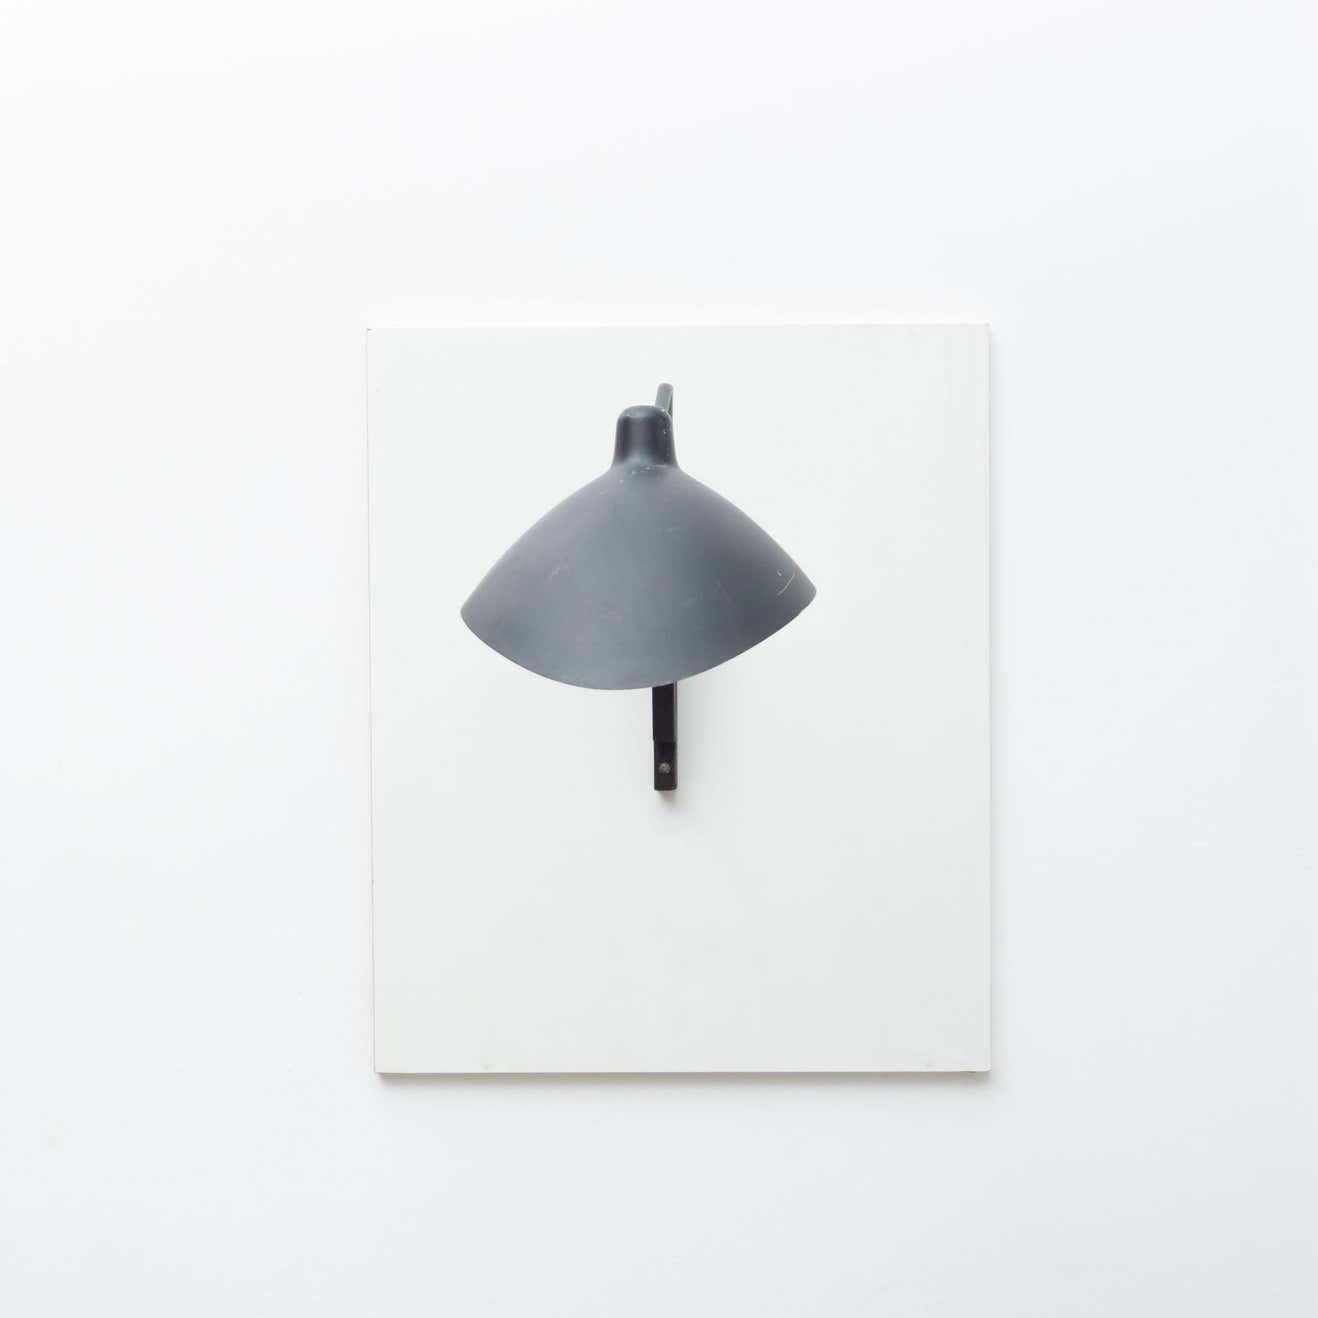 Mid-Century Modern Midcentury Black Metal Wall Lamp in the Style of Serge Mouille, circa 1950 For Sale